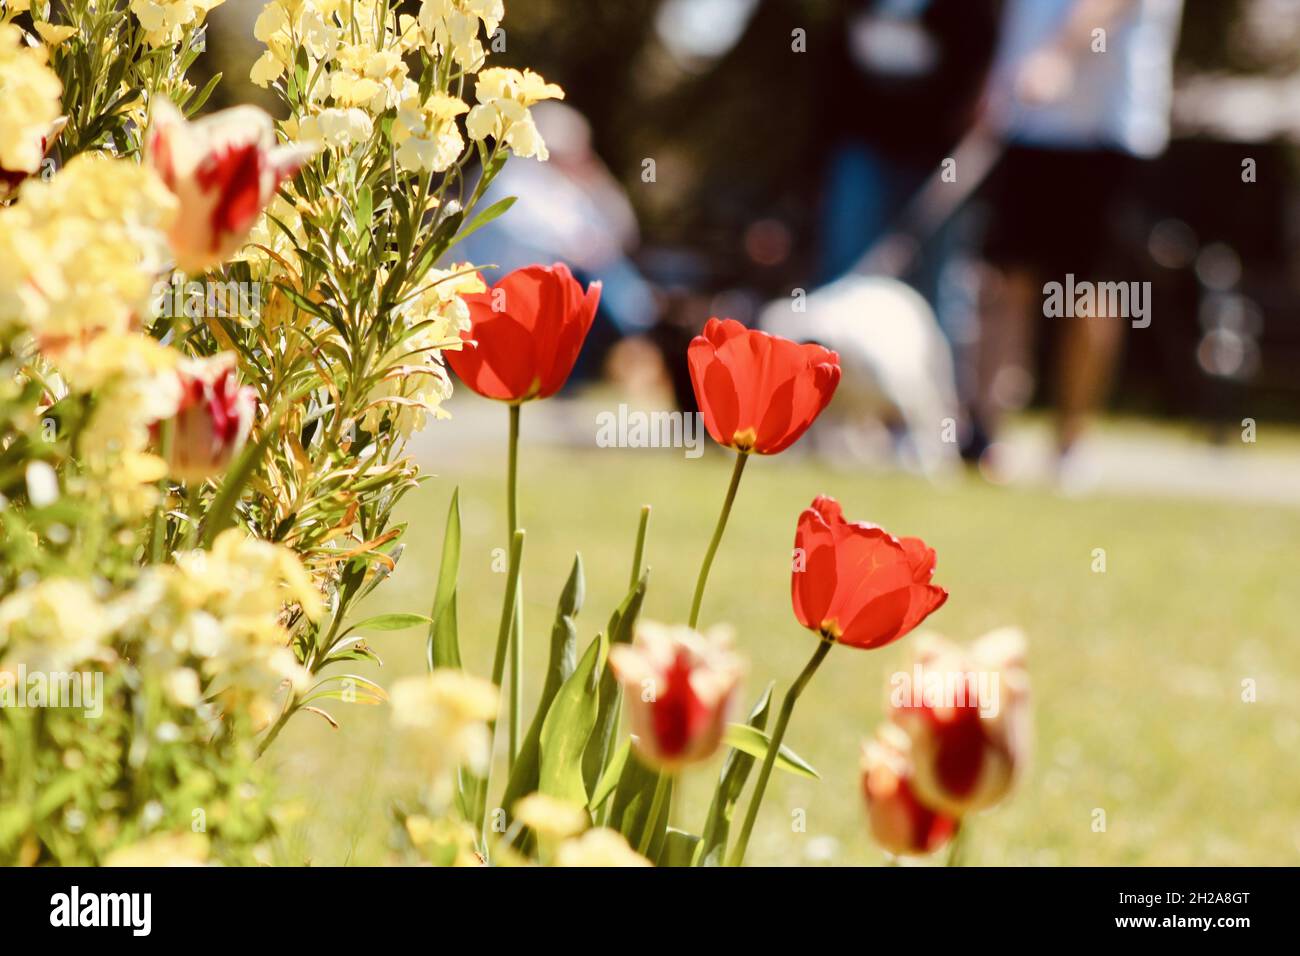 Shallow focus of wild red tulips and yellow toadflaxes with a background of people Stock Photo